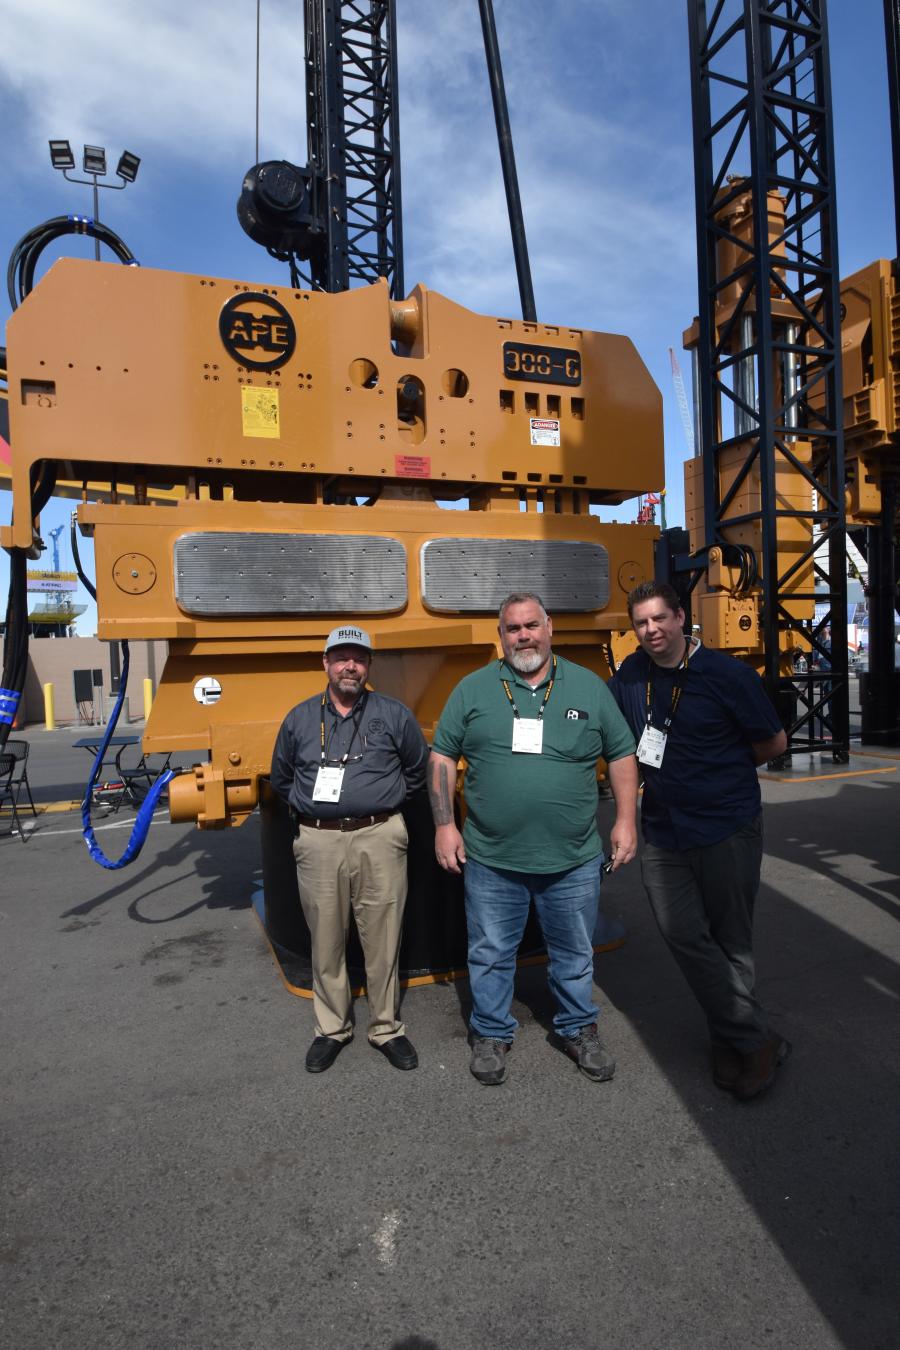 American Piledriving Equipment Inc. (APE) produces the world’s largest pile drivers and has offices in every corner of the United States, Asia and has distribution worldwide.  Part of the sales team pictured here in their impressive display (L-R) are Jimmy Deemer, Bill Ziadie and Daniel Corp. 